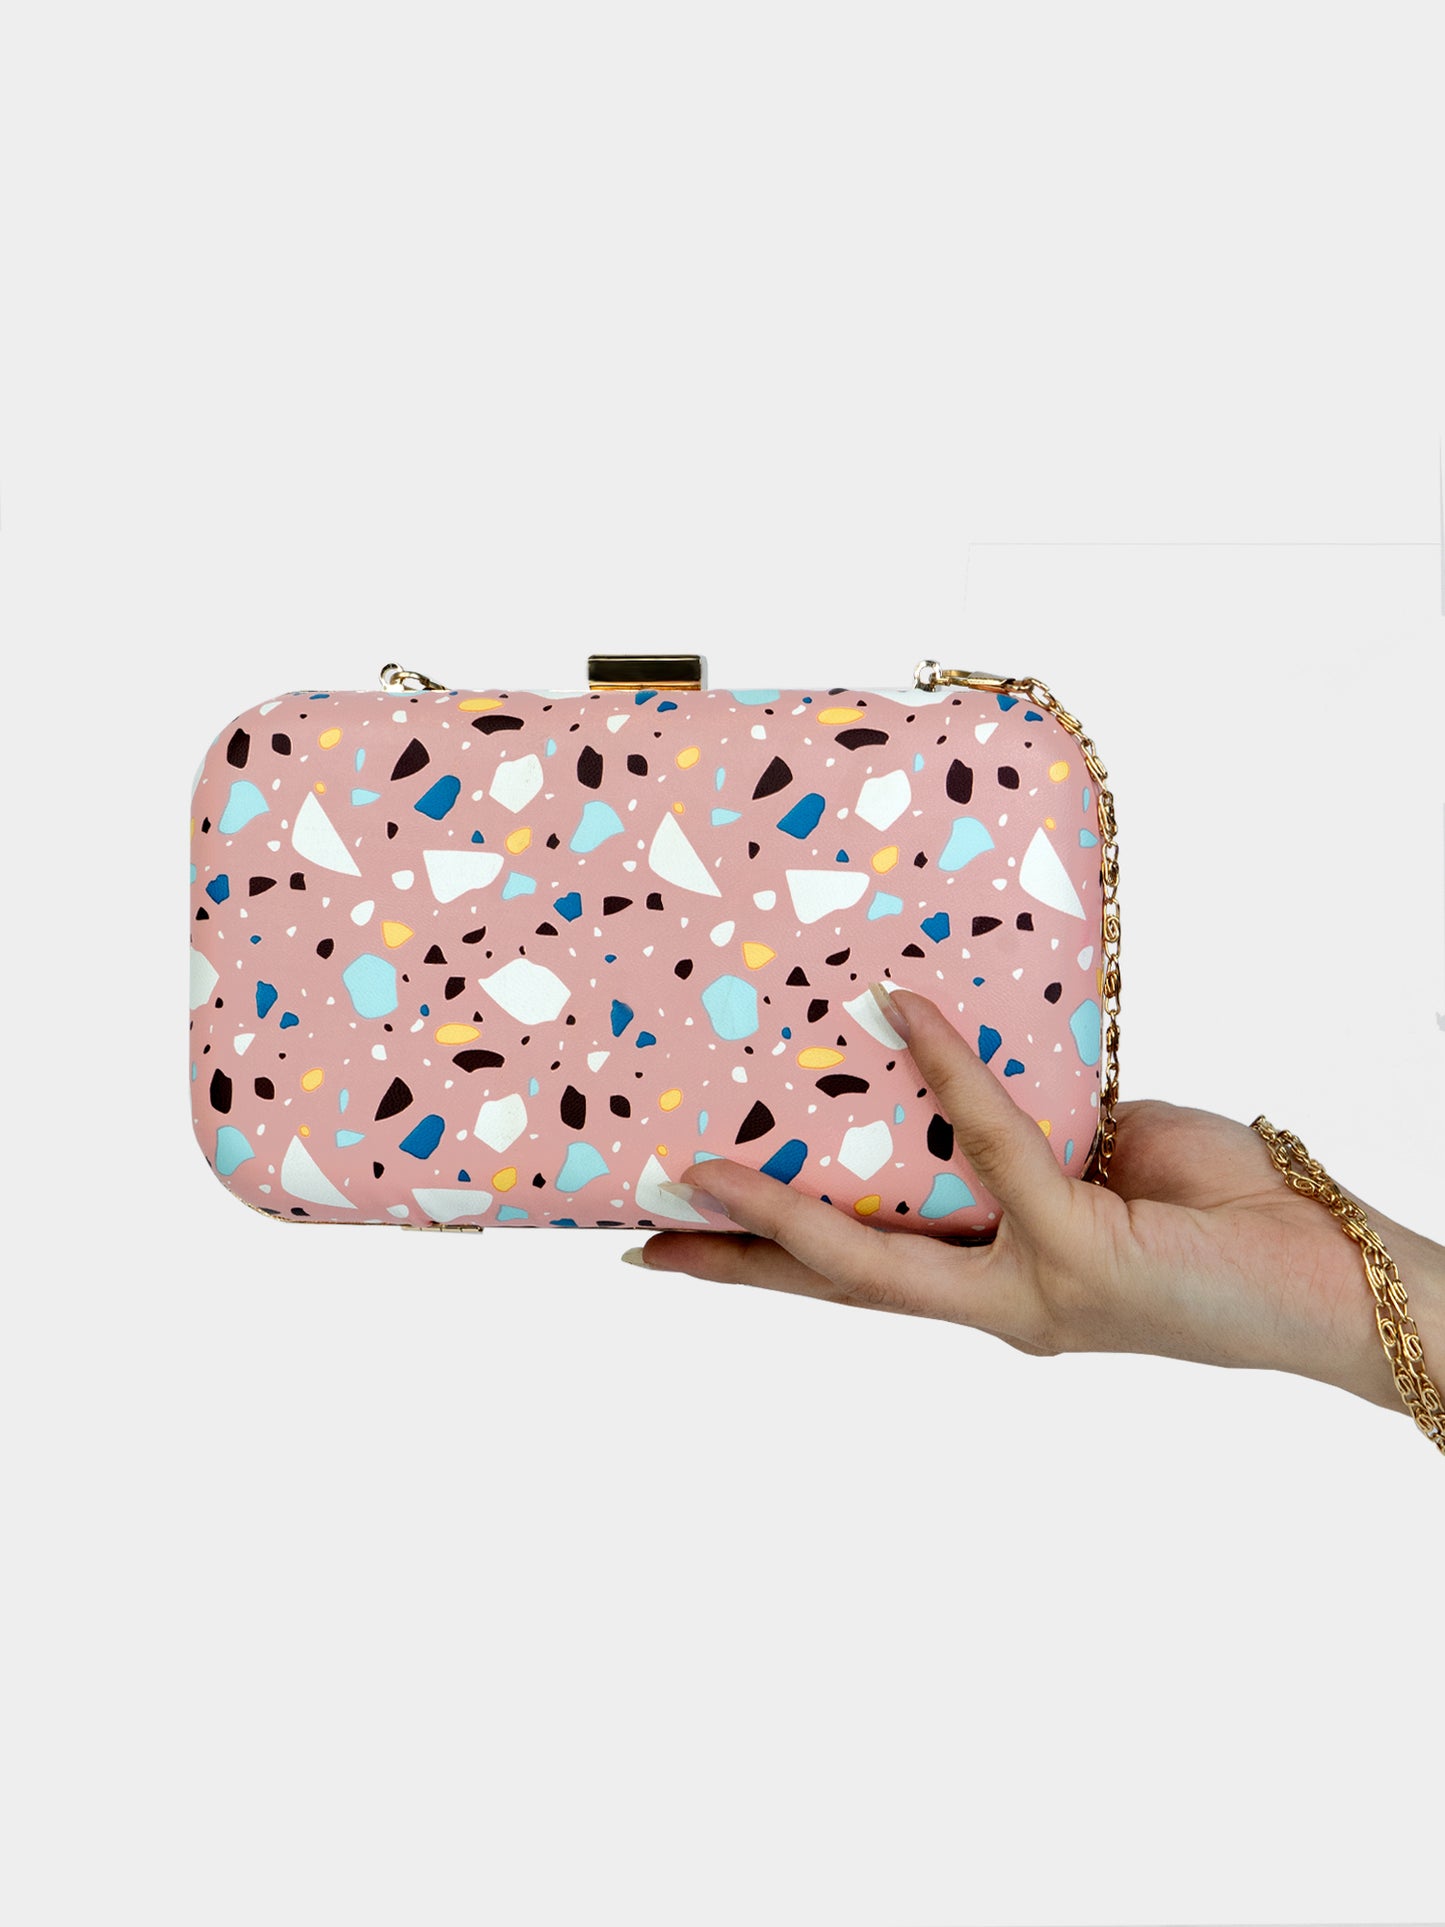 Spot On! Abstract Modern Pink Party Clutch | Modern Myth